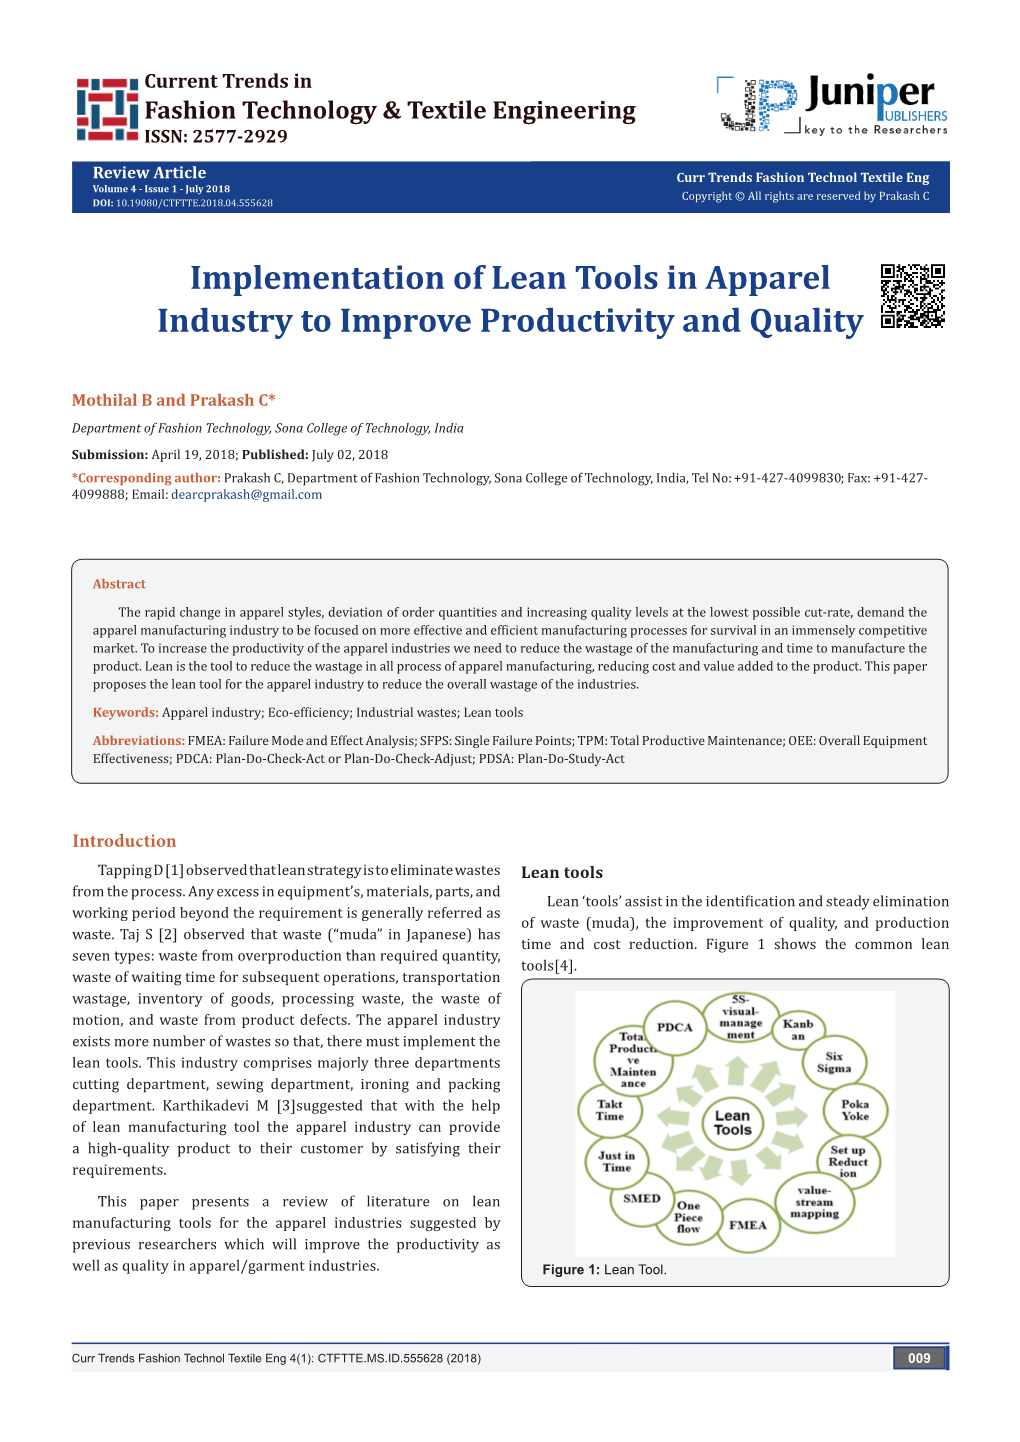 Implementation of Lean Tools in Apparel Industry to Improve Productivity and Quality